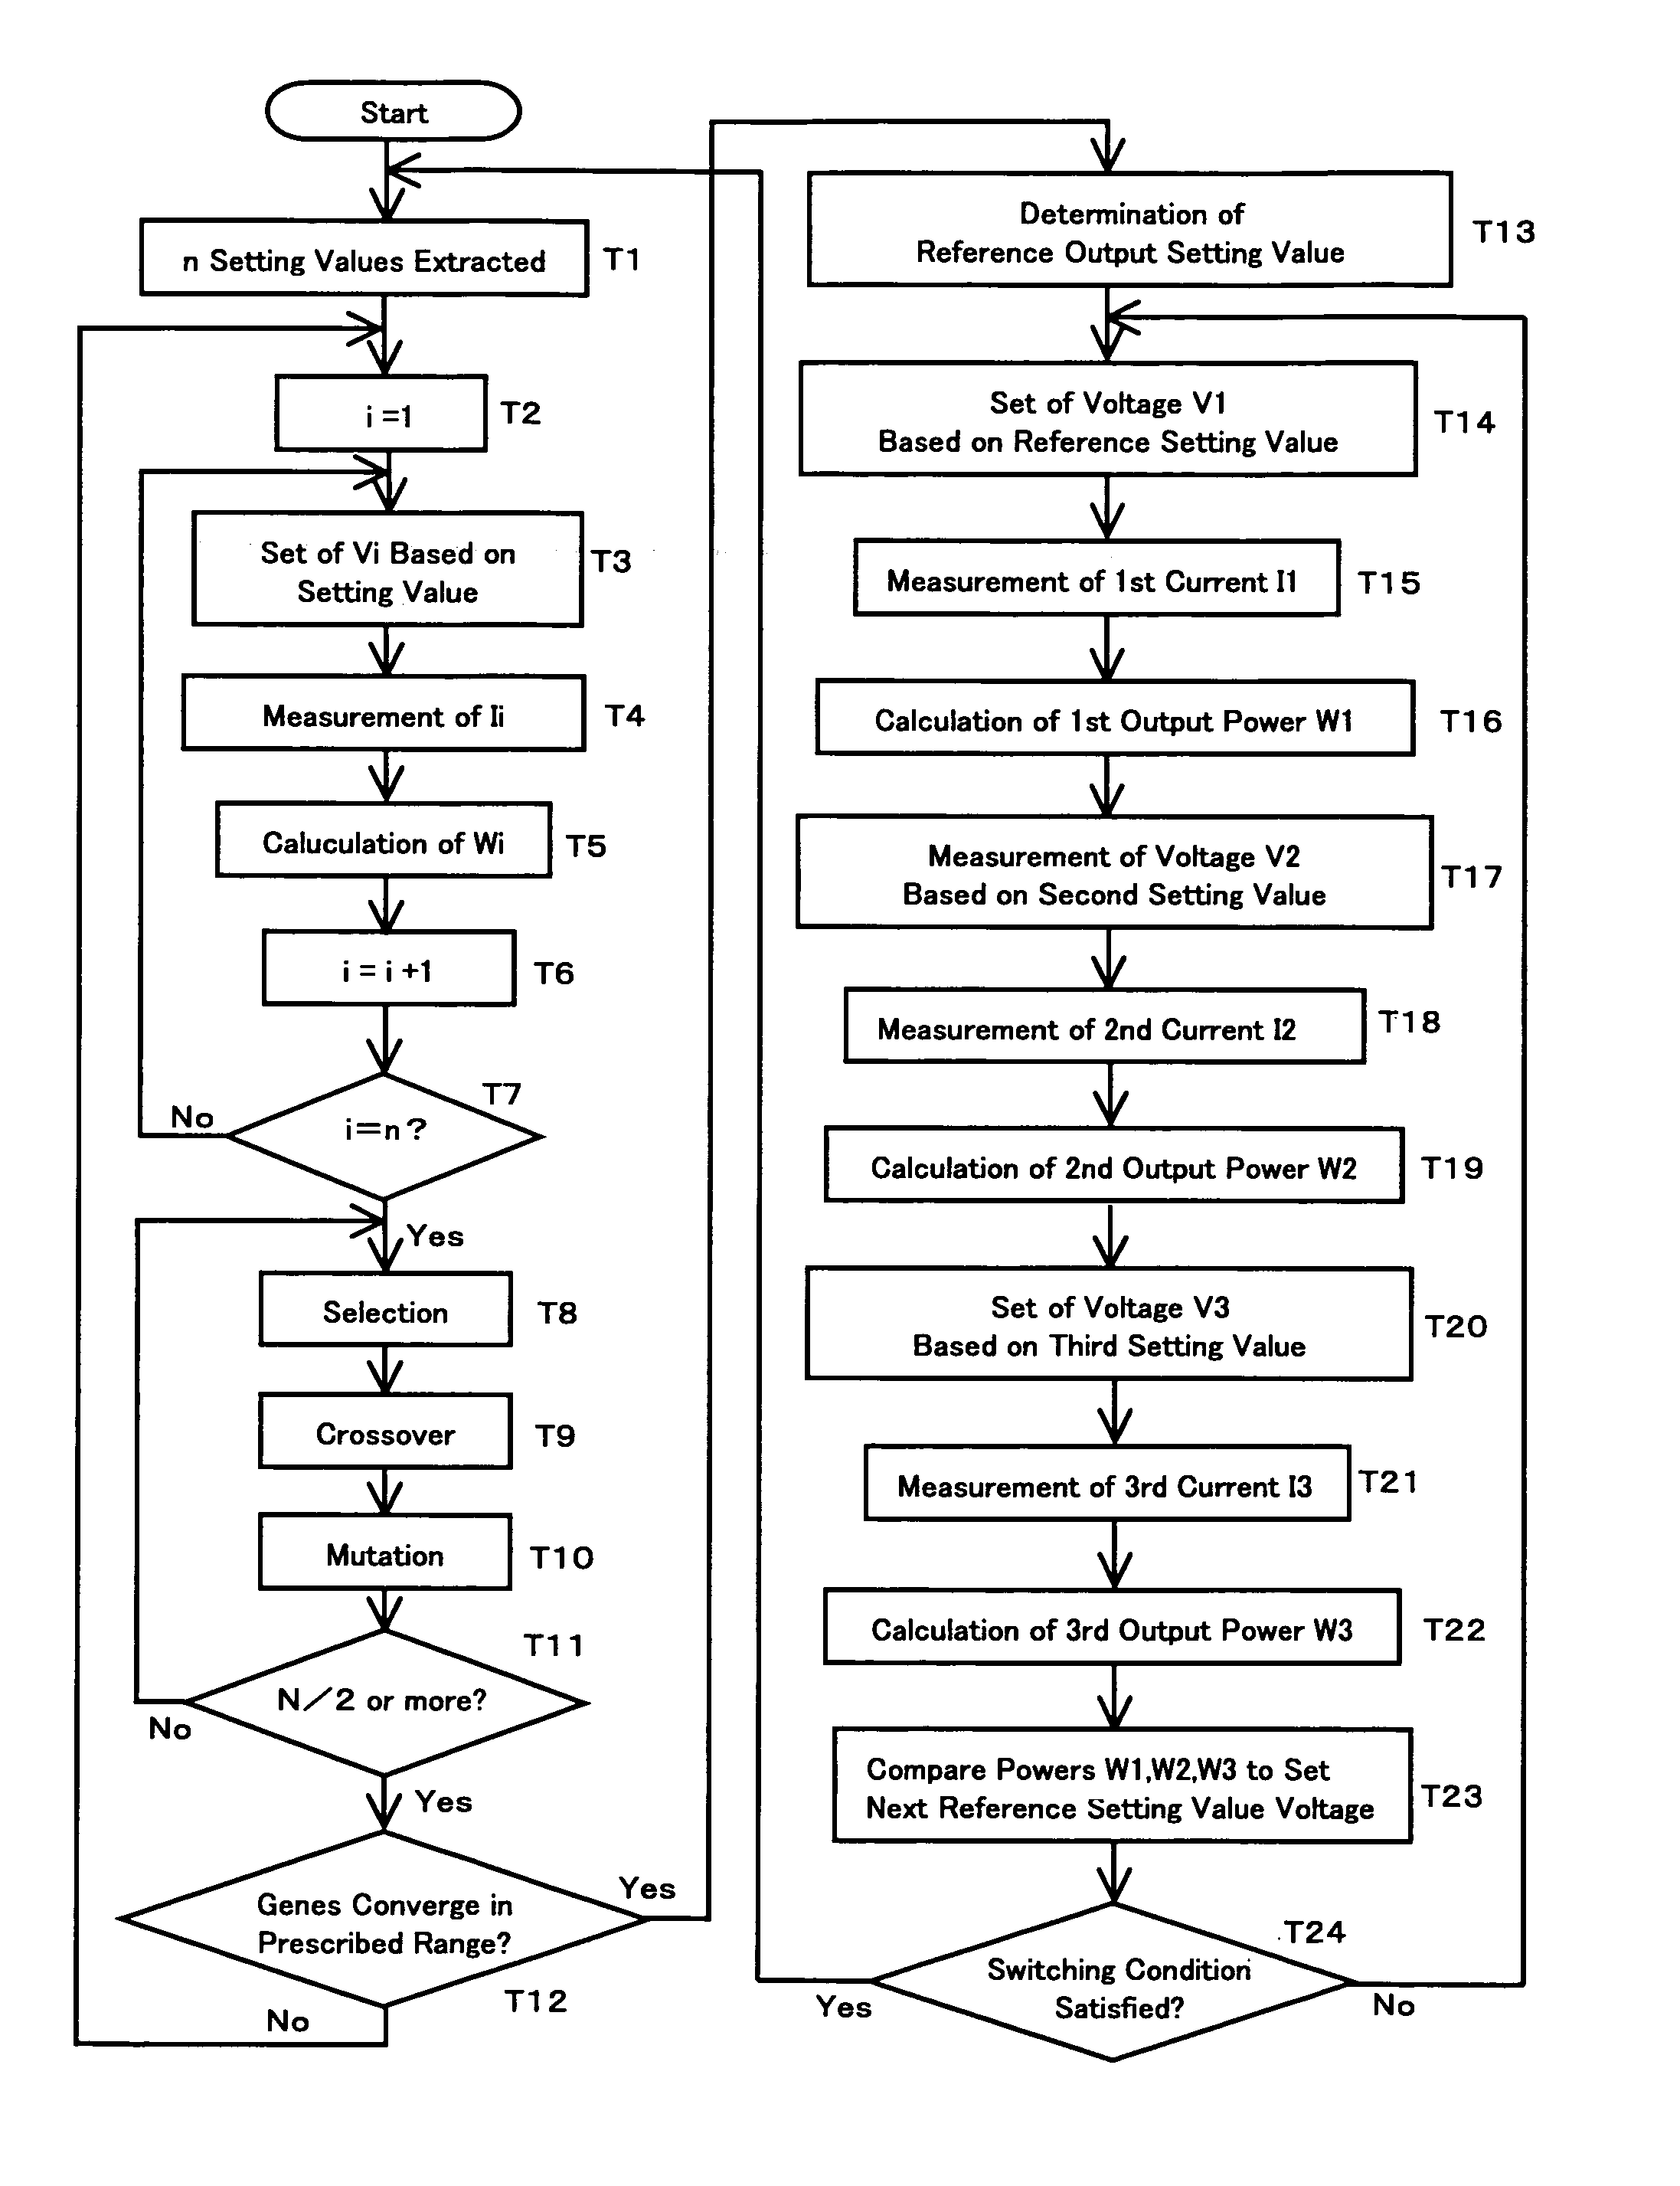 Method of controlling photovoltaic power generation system